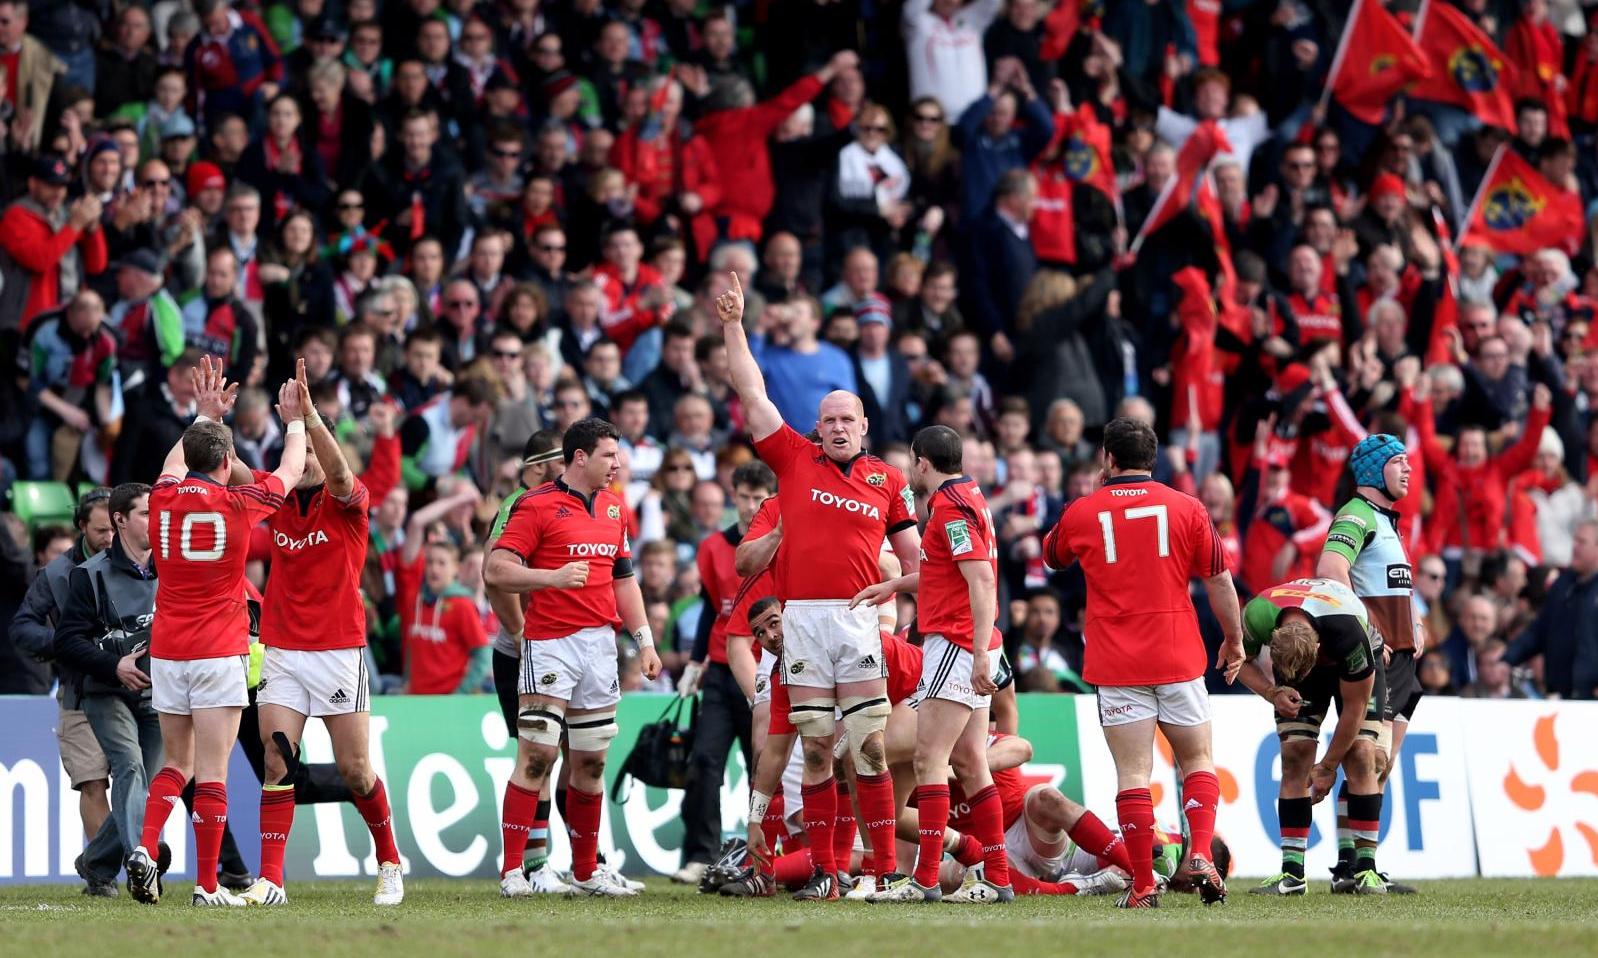 Munster Rugby captain Paul O'Connell celebrates following his teams victory over Harlequins in the 2013 Heineken Cup Quarter Final (courtesy of Getty Images)